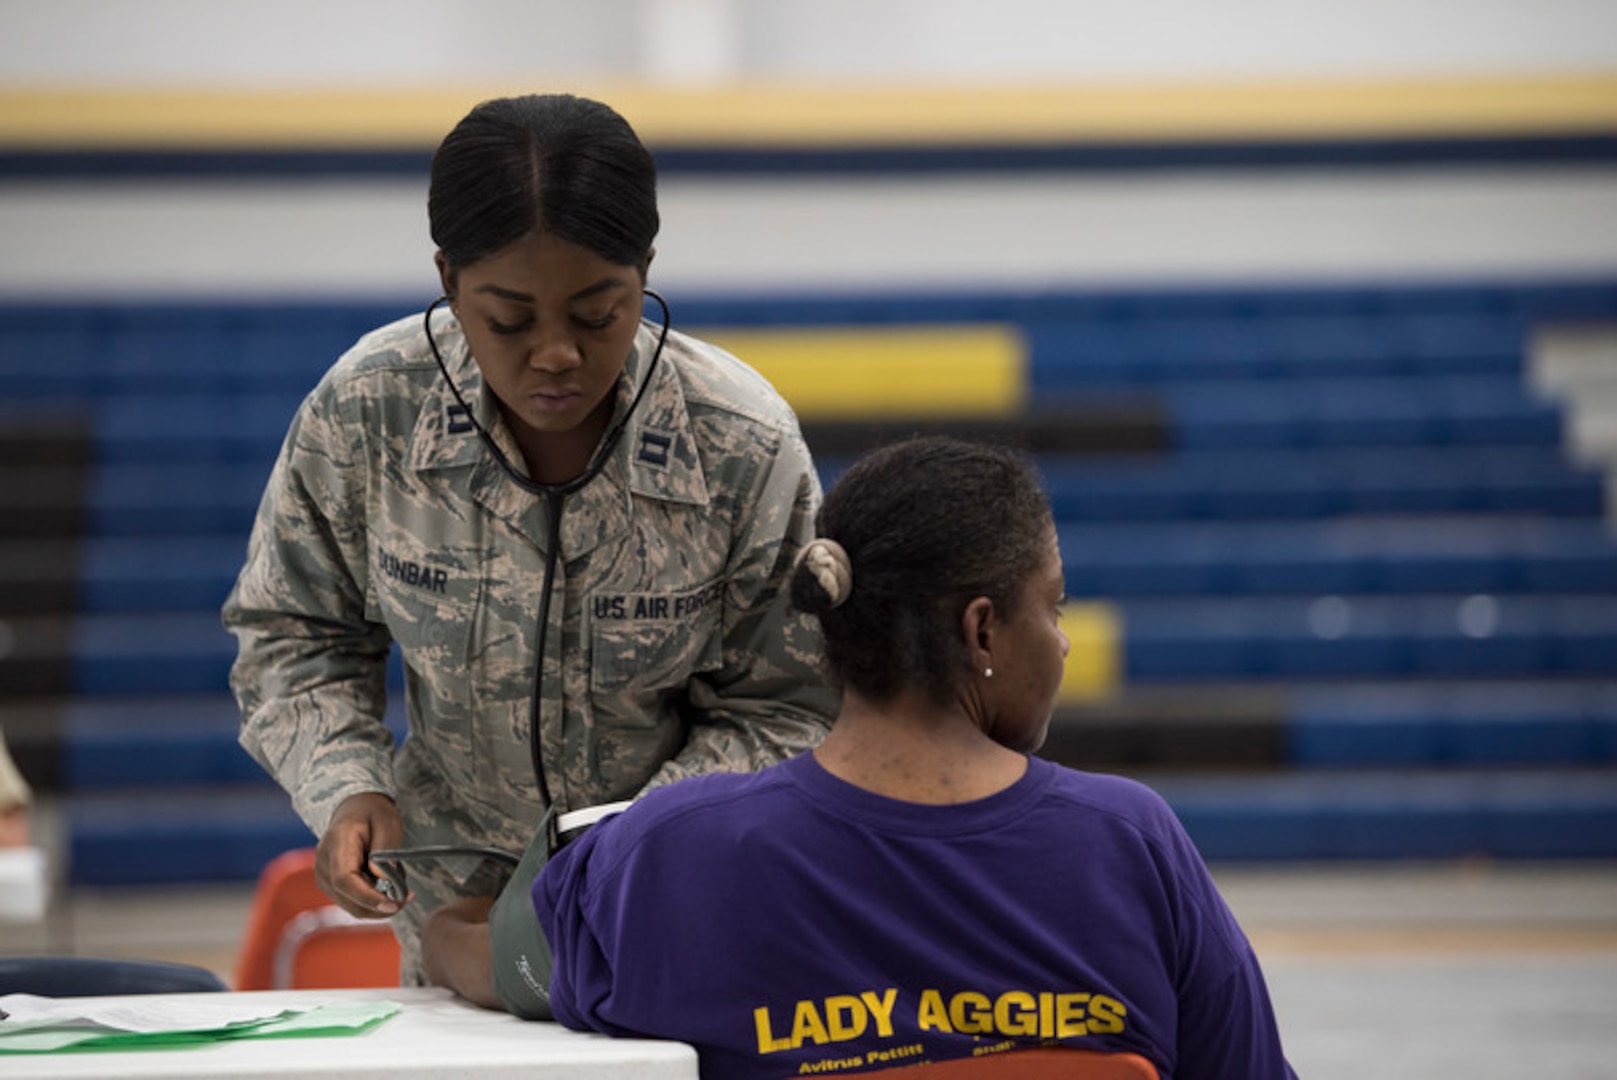 Capt. Nikita Dunbar, an Air National Guard critical-care nurse from the 187th Fighter Wing CERFP in Montgomery, Ala., takes a patient's blood pressure June 3, 2018, at the Alabama Wellness Innovative Readiness Training at Monroe County High School in Monroeville, Ala. Air Guardsmen from Alabama and Wisconsin were part of the joint force participating in the two-week training that provided no-cost health care to the citizens of lower Alabama.